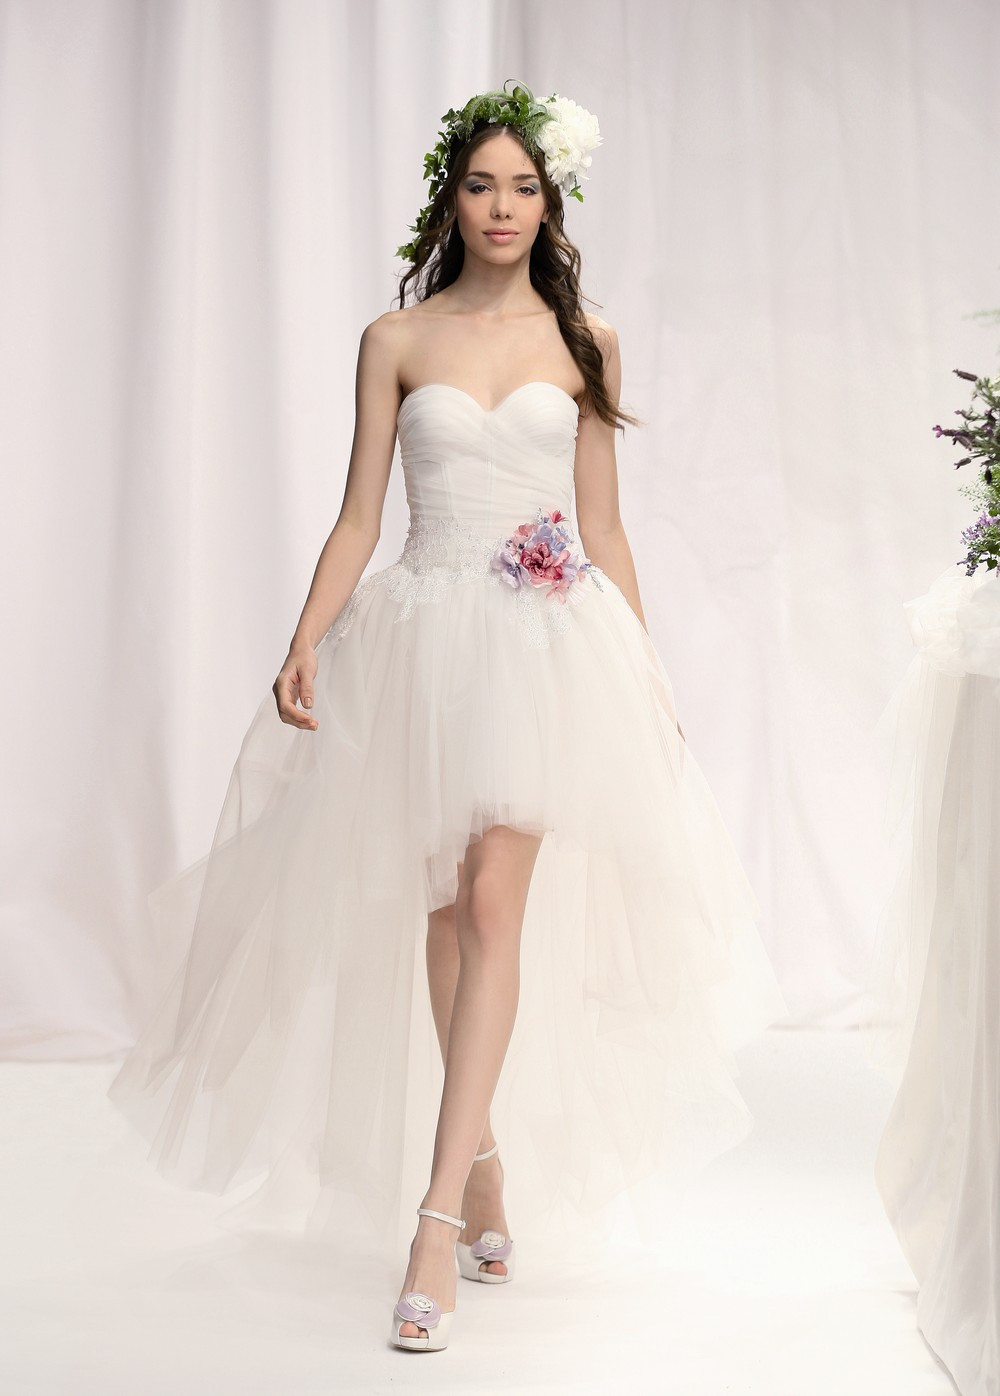 Images Of Wedding Gowns
 Most Beautiful Wedding Dresses 2012 Bridal Wears